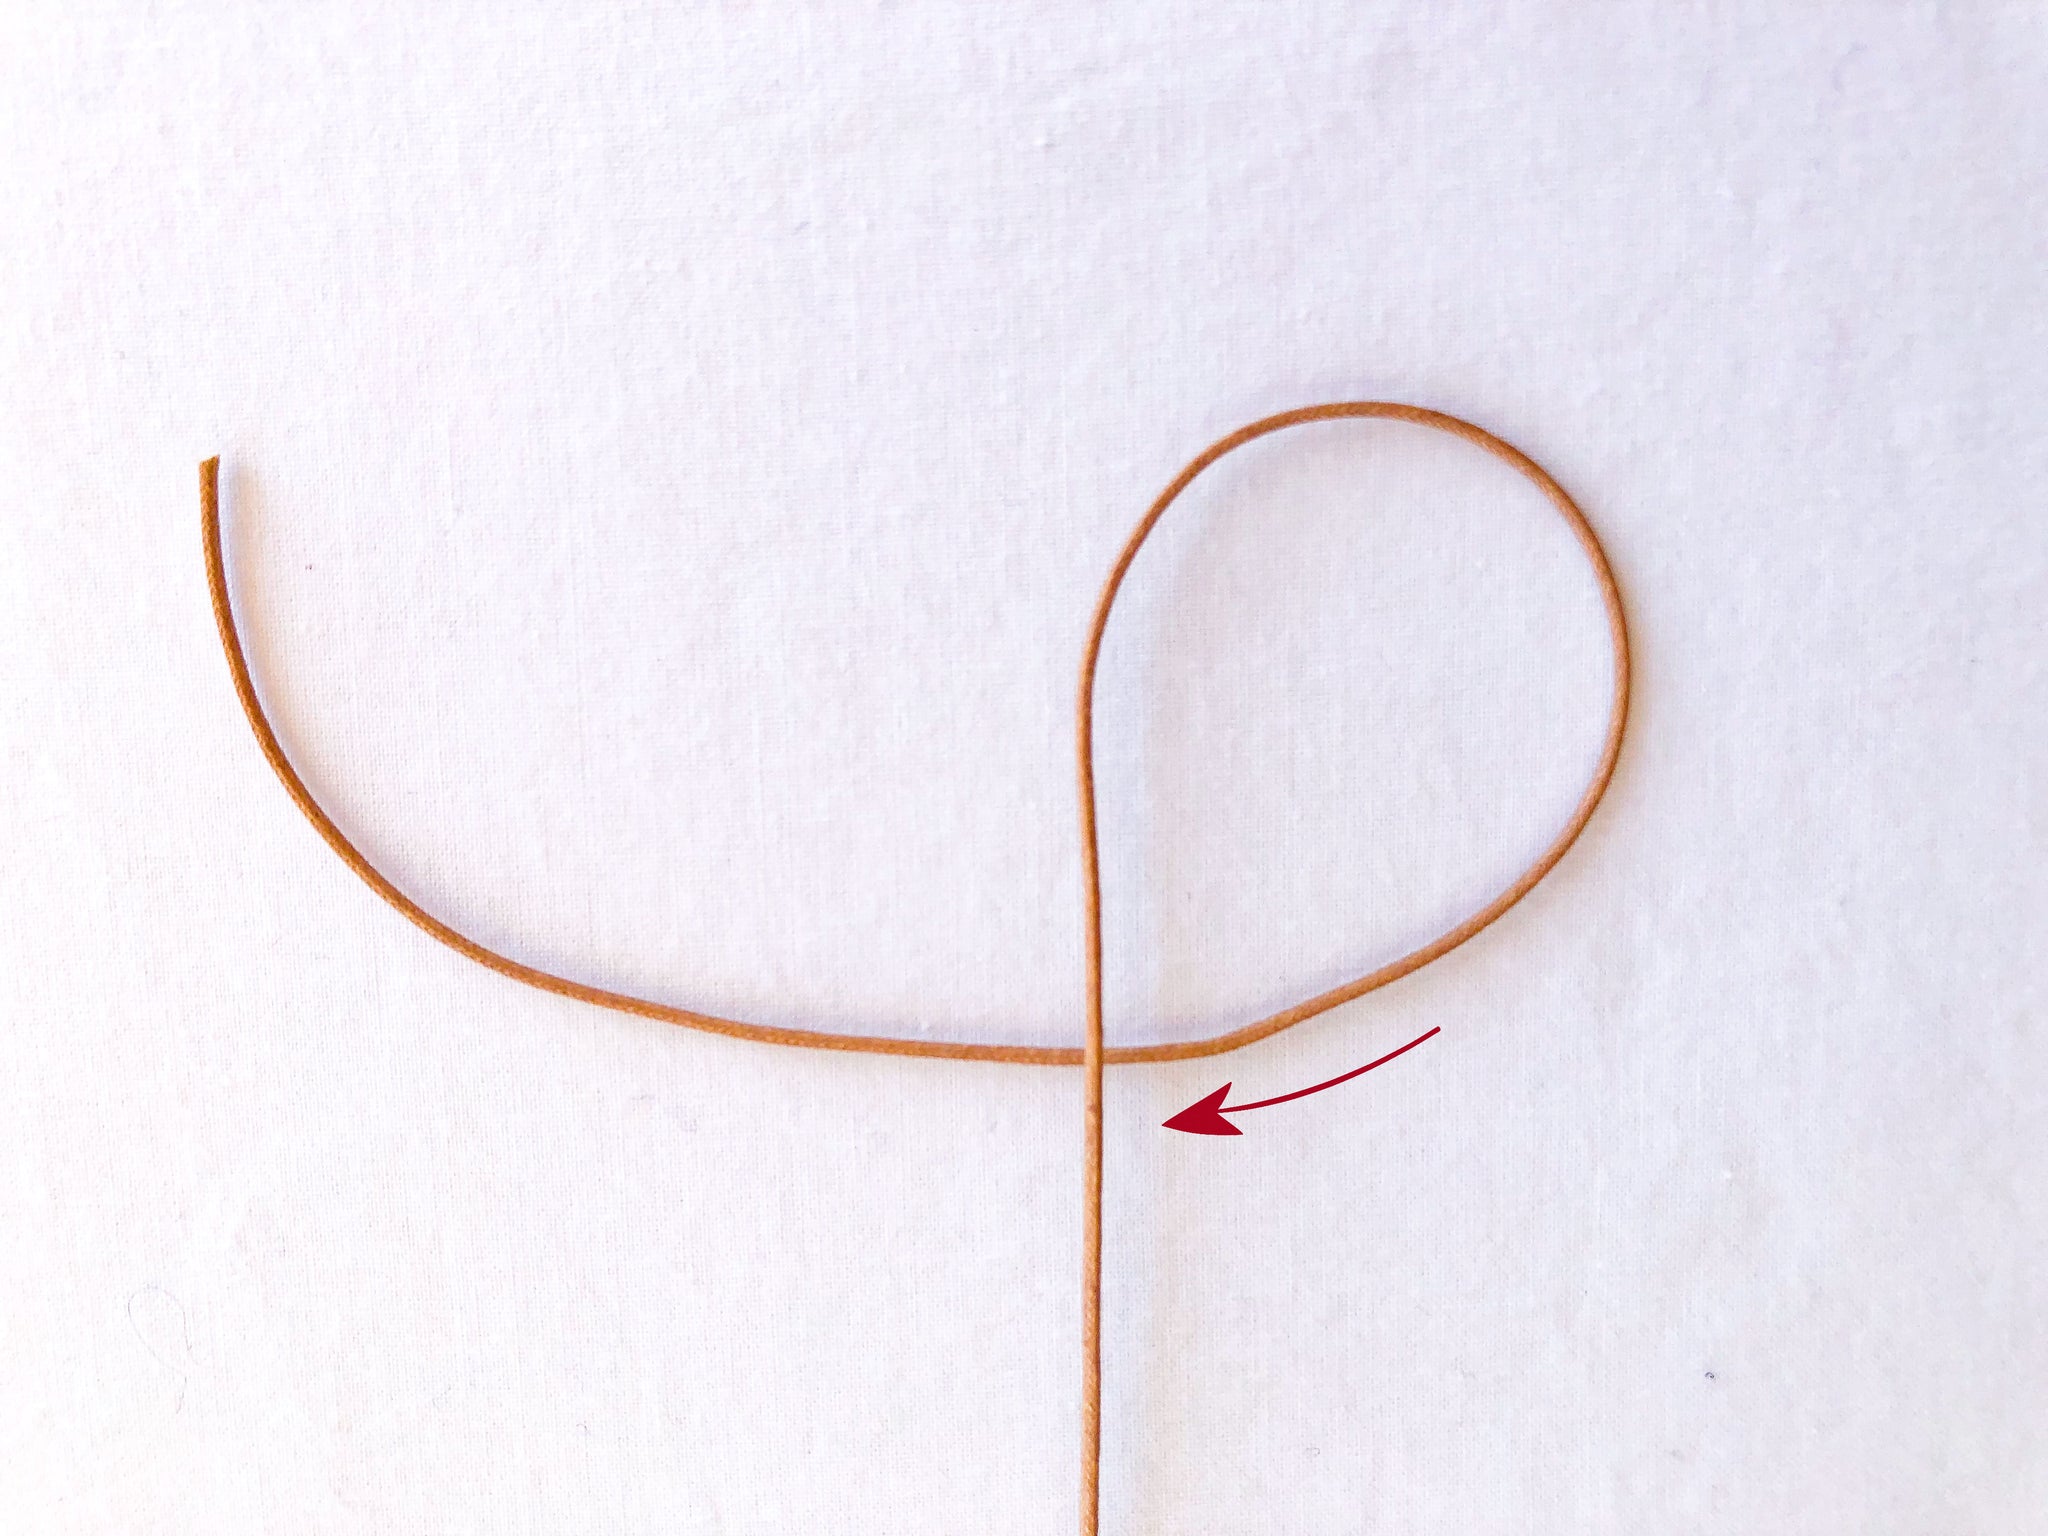 How to tie a Slip knot, step 1